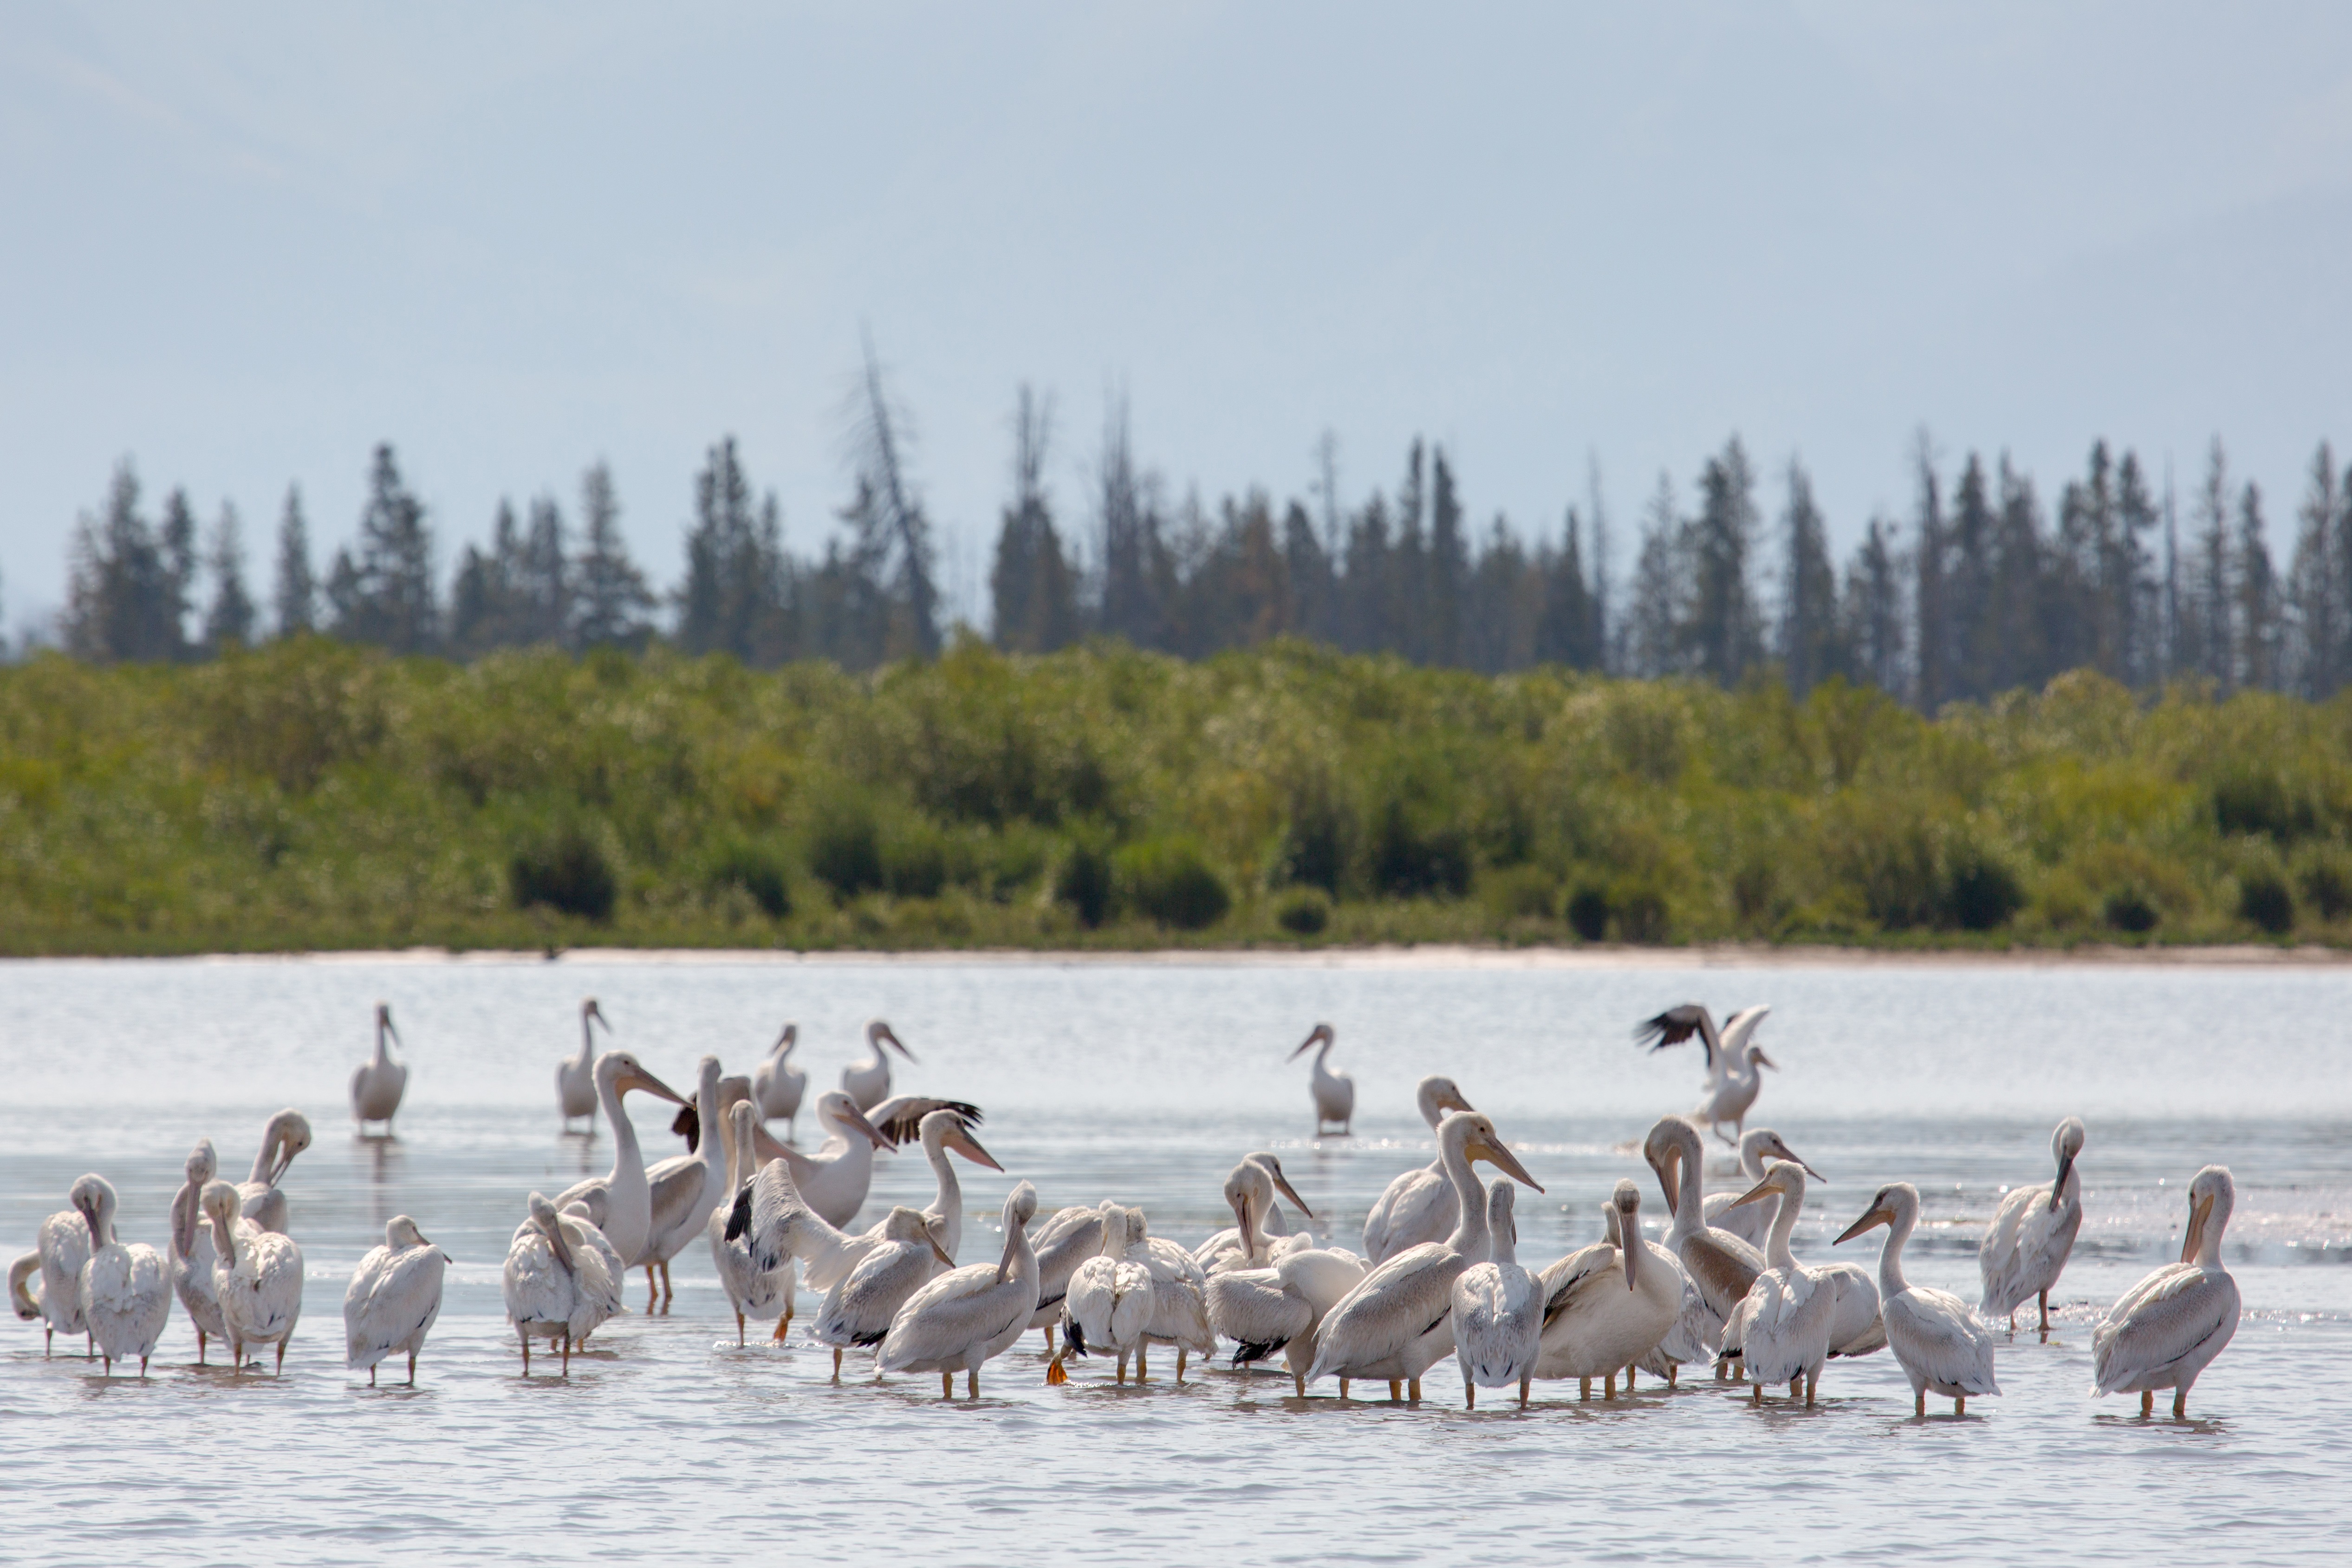 Pelicans in the river photo